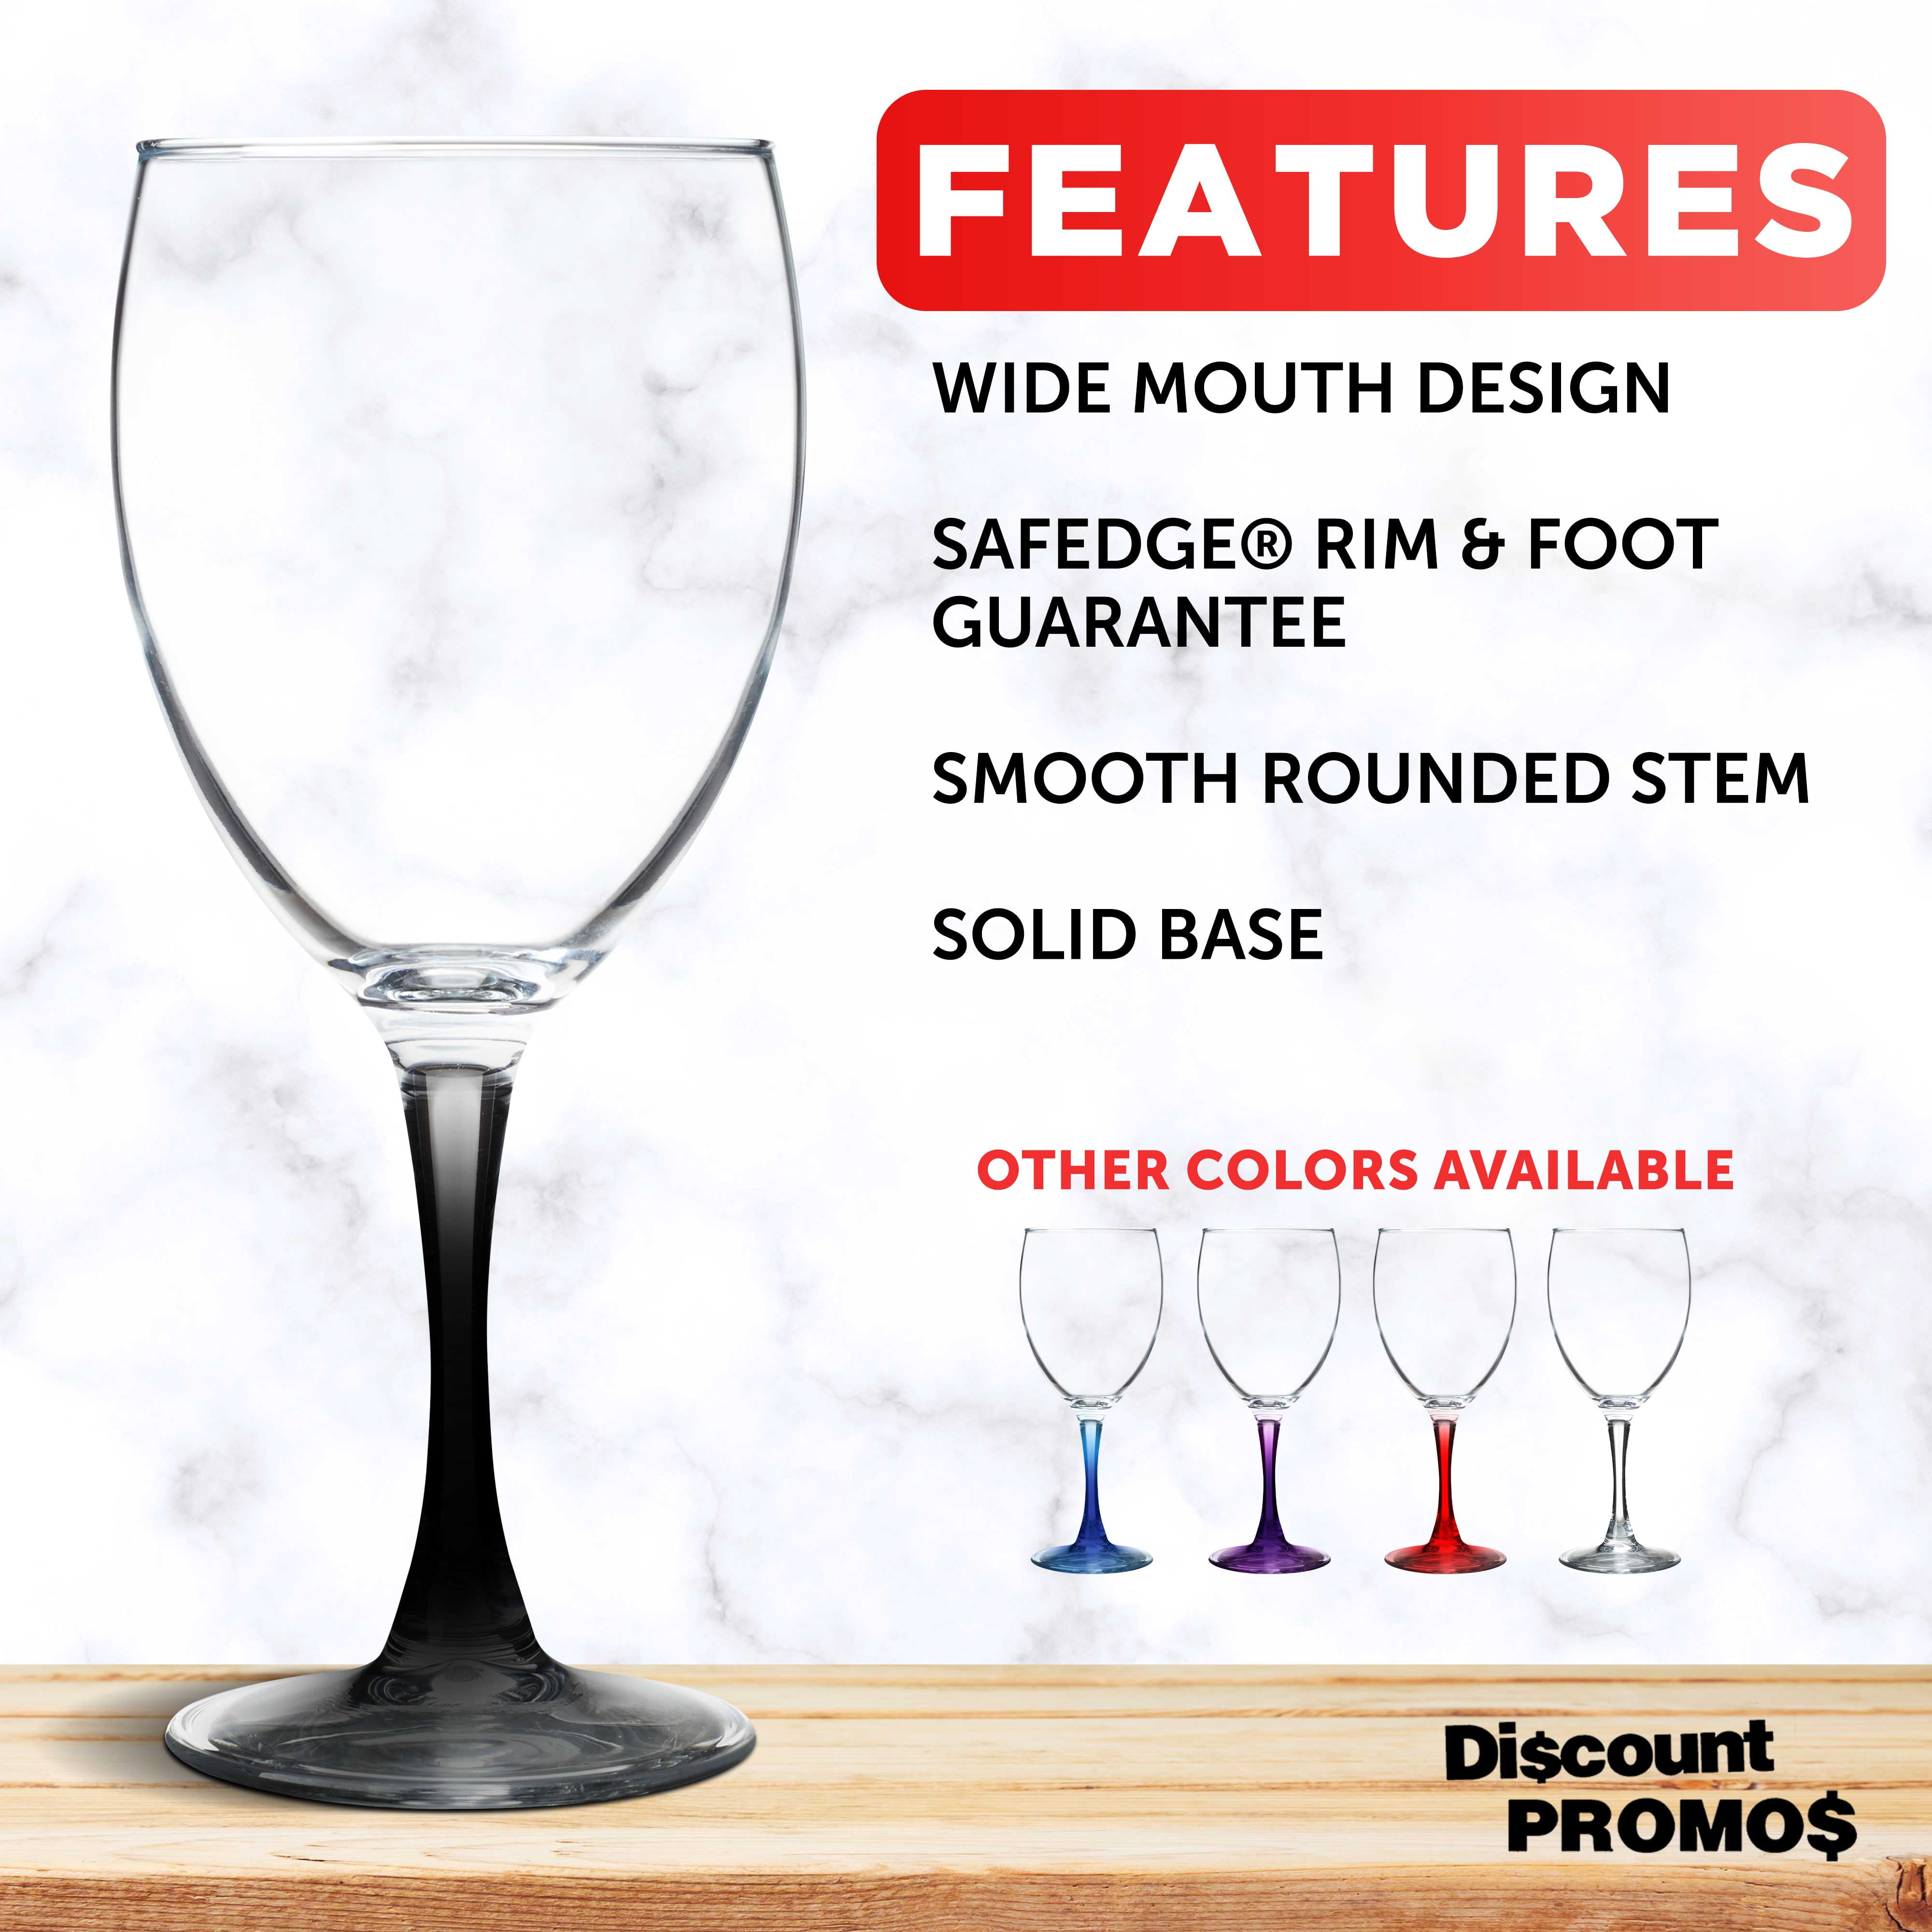 Nuance Wine Glasses by ARC 10.5 oz. Set of 10, Bulk Pack - Restaurant  Glassware, Perfect for Red Wine, White Wine, Cocktails - Black